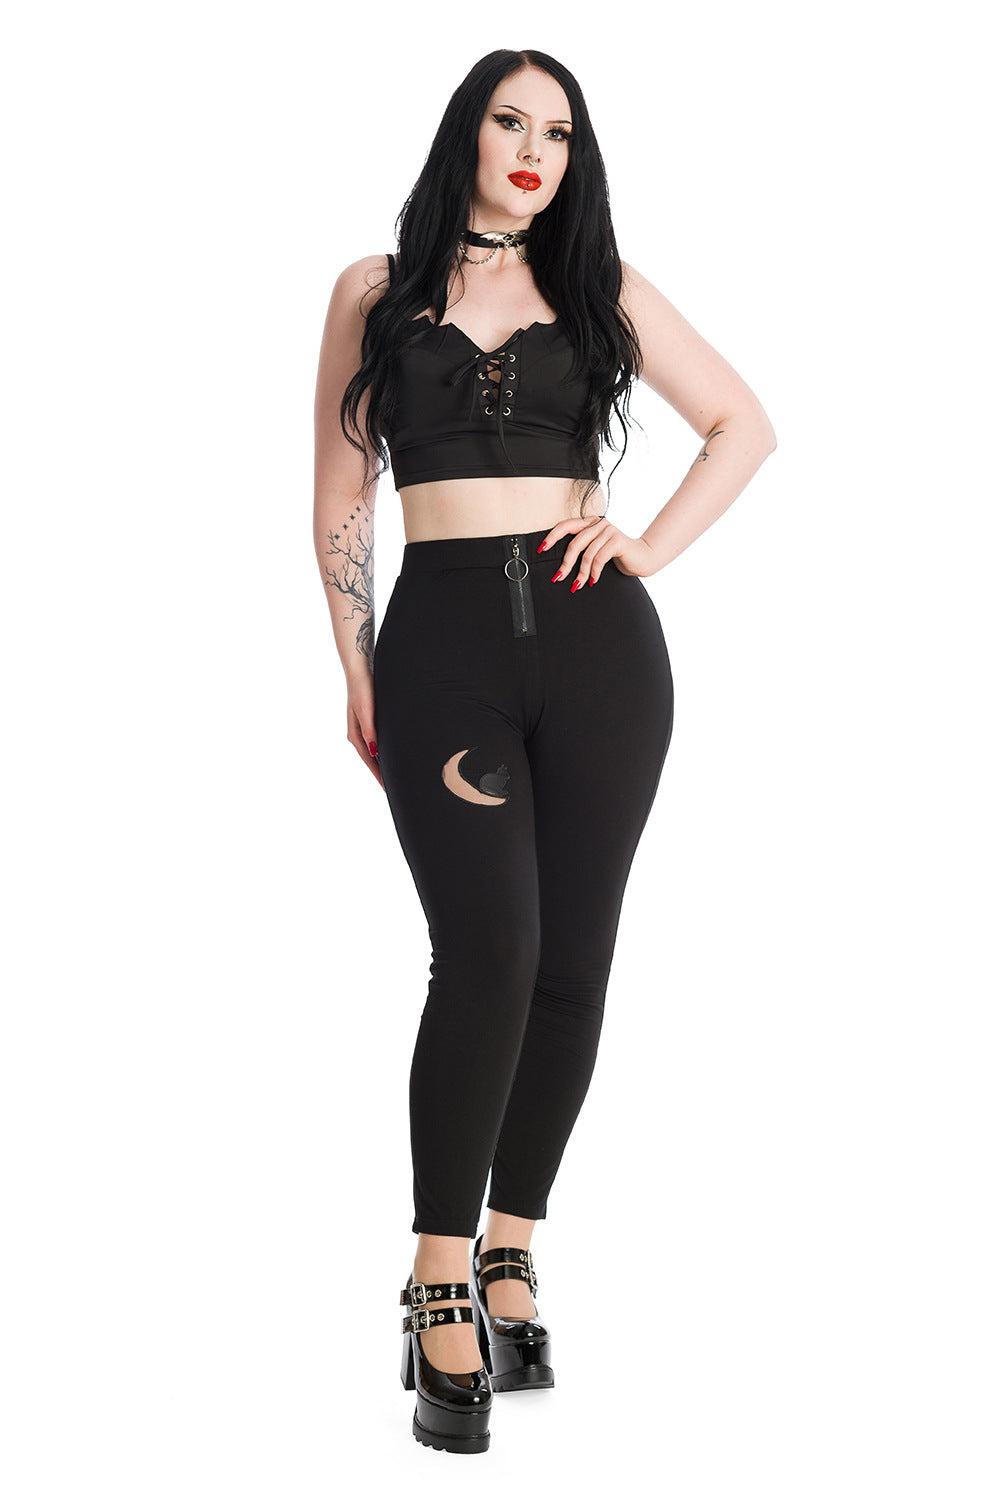 Gothic model in black bat wing cop top with High waist black leggings with mesh moon and cat on one leg 